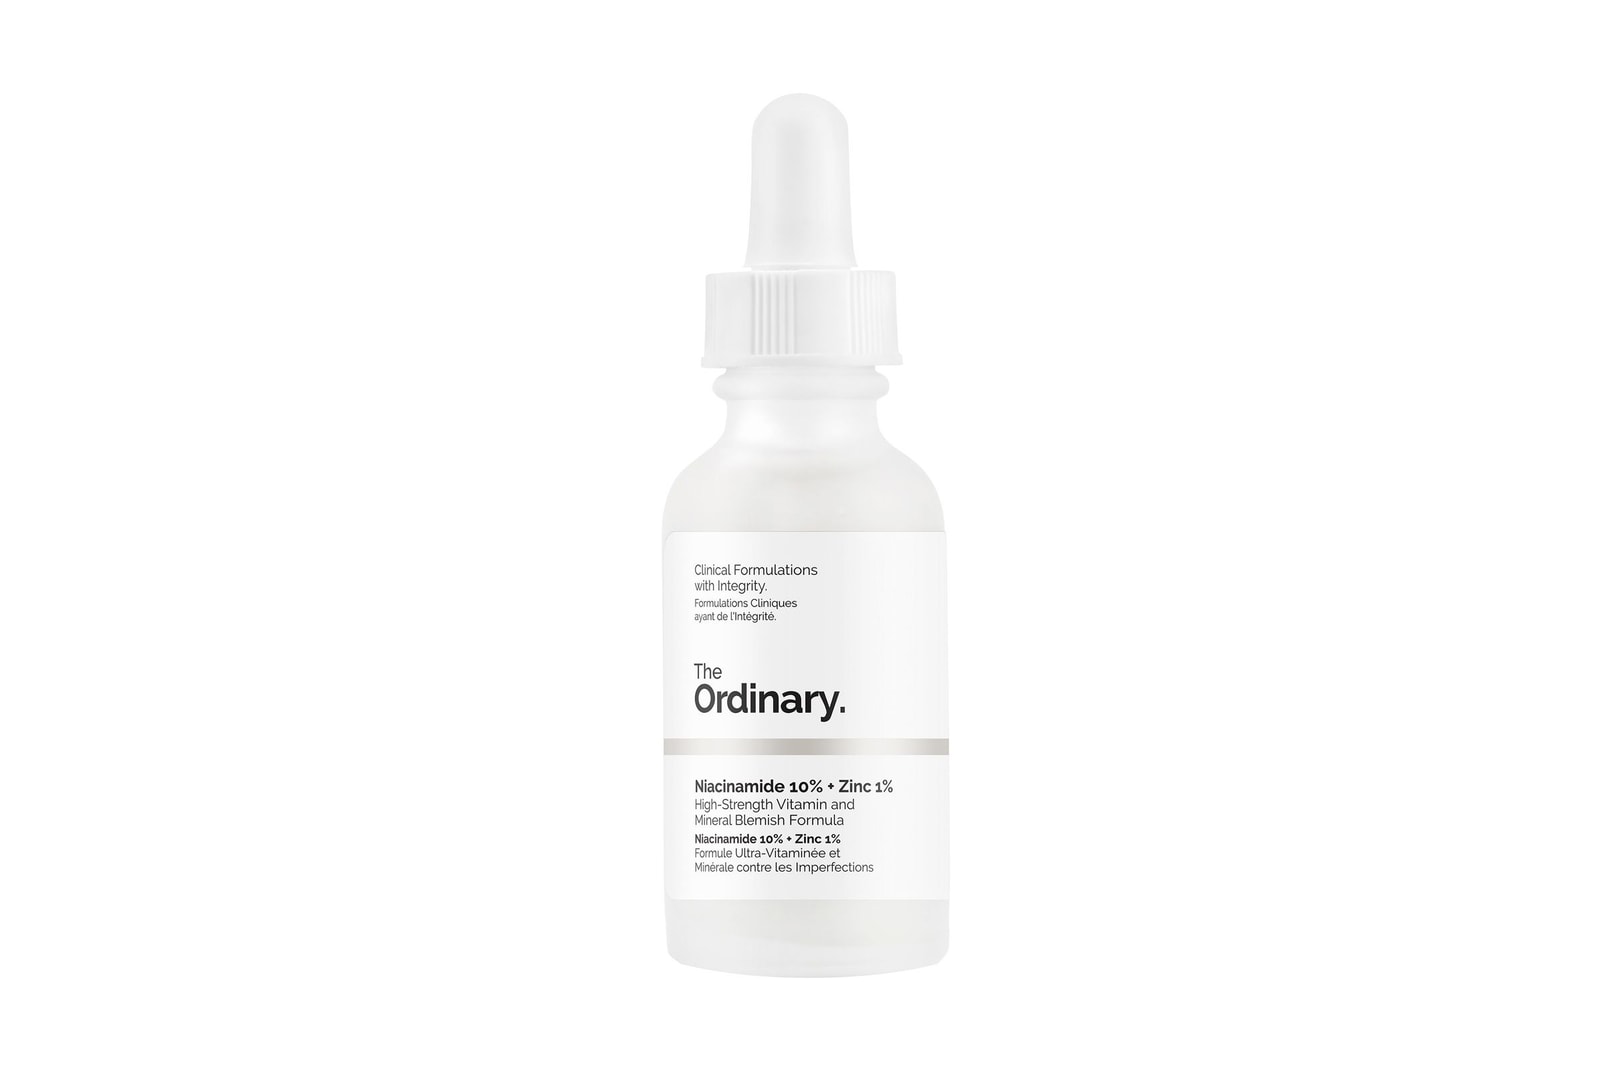 Best The Ordinary Products For Acne-Prone Skin Peeling Pore Solution Mask Serum Toner How To Clear Acne Scarring Skincare Beauty